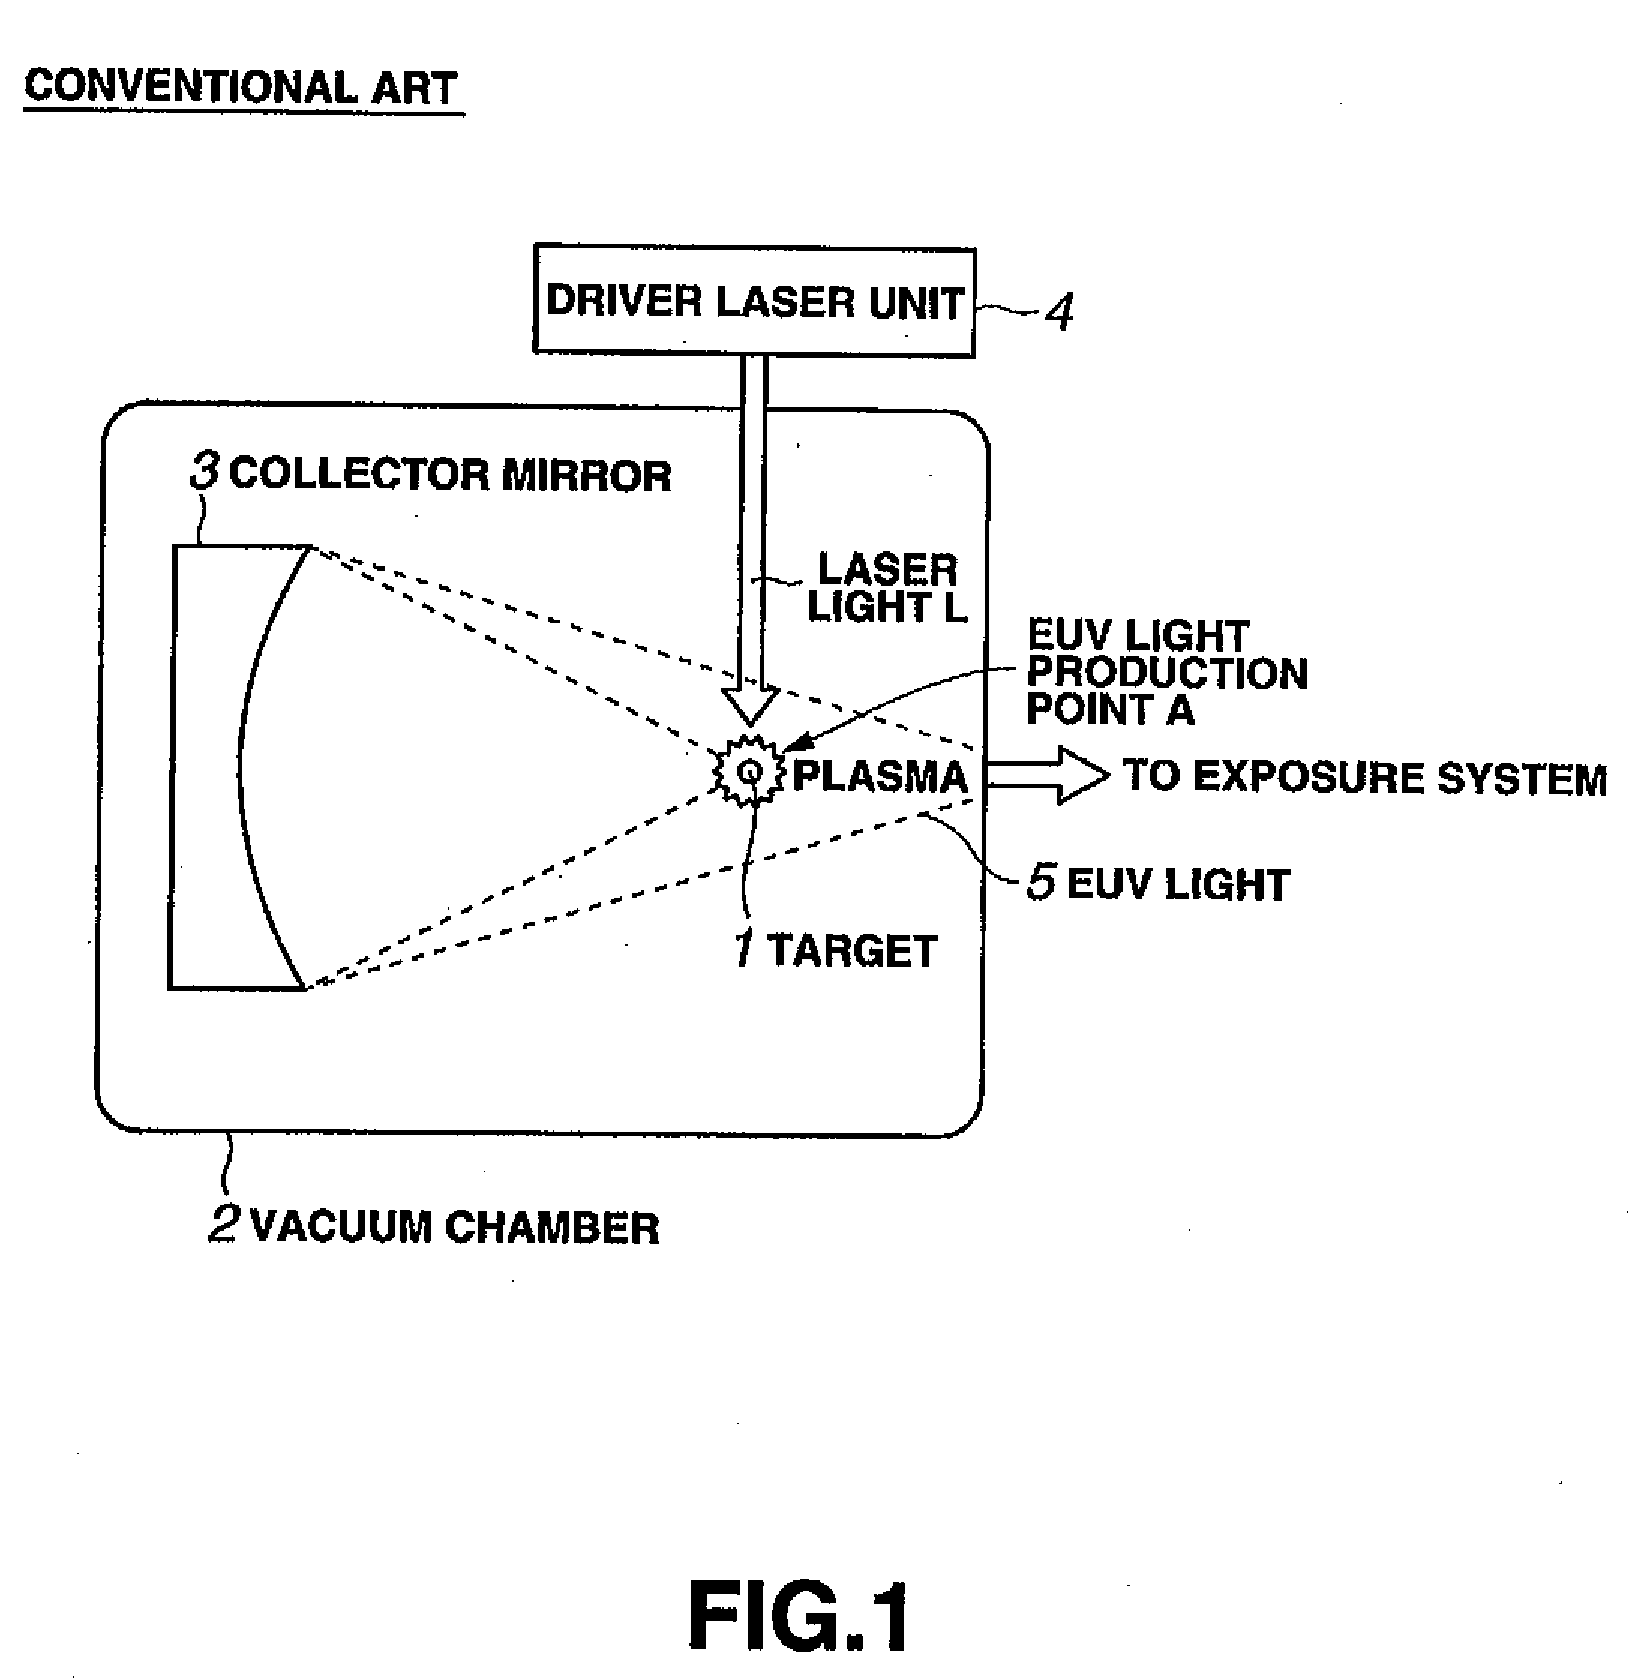 Apparatus for and method of withdrawing ions in EUV light production apparatus